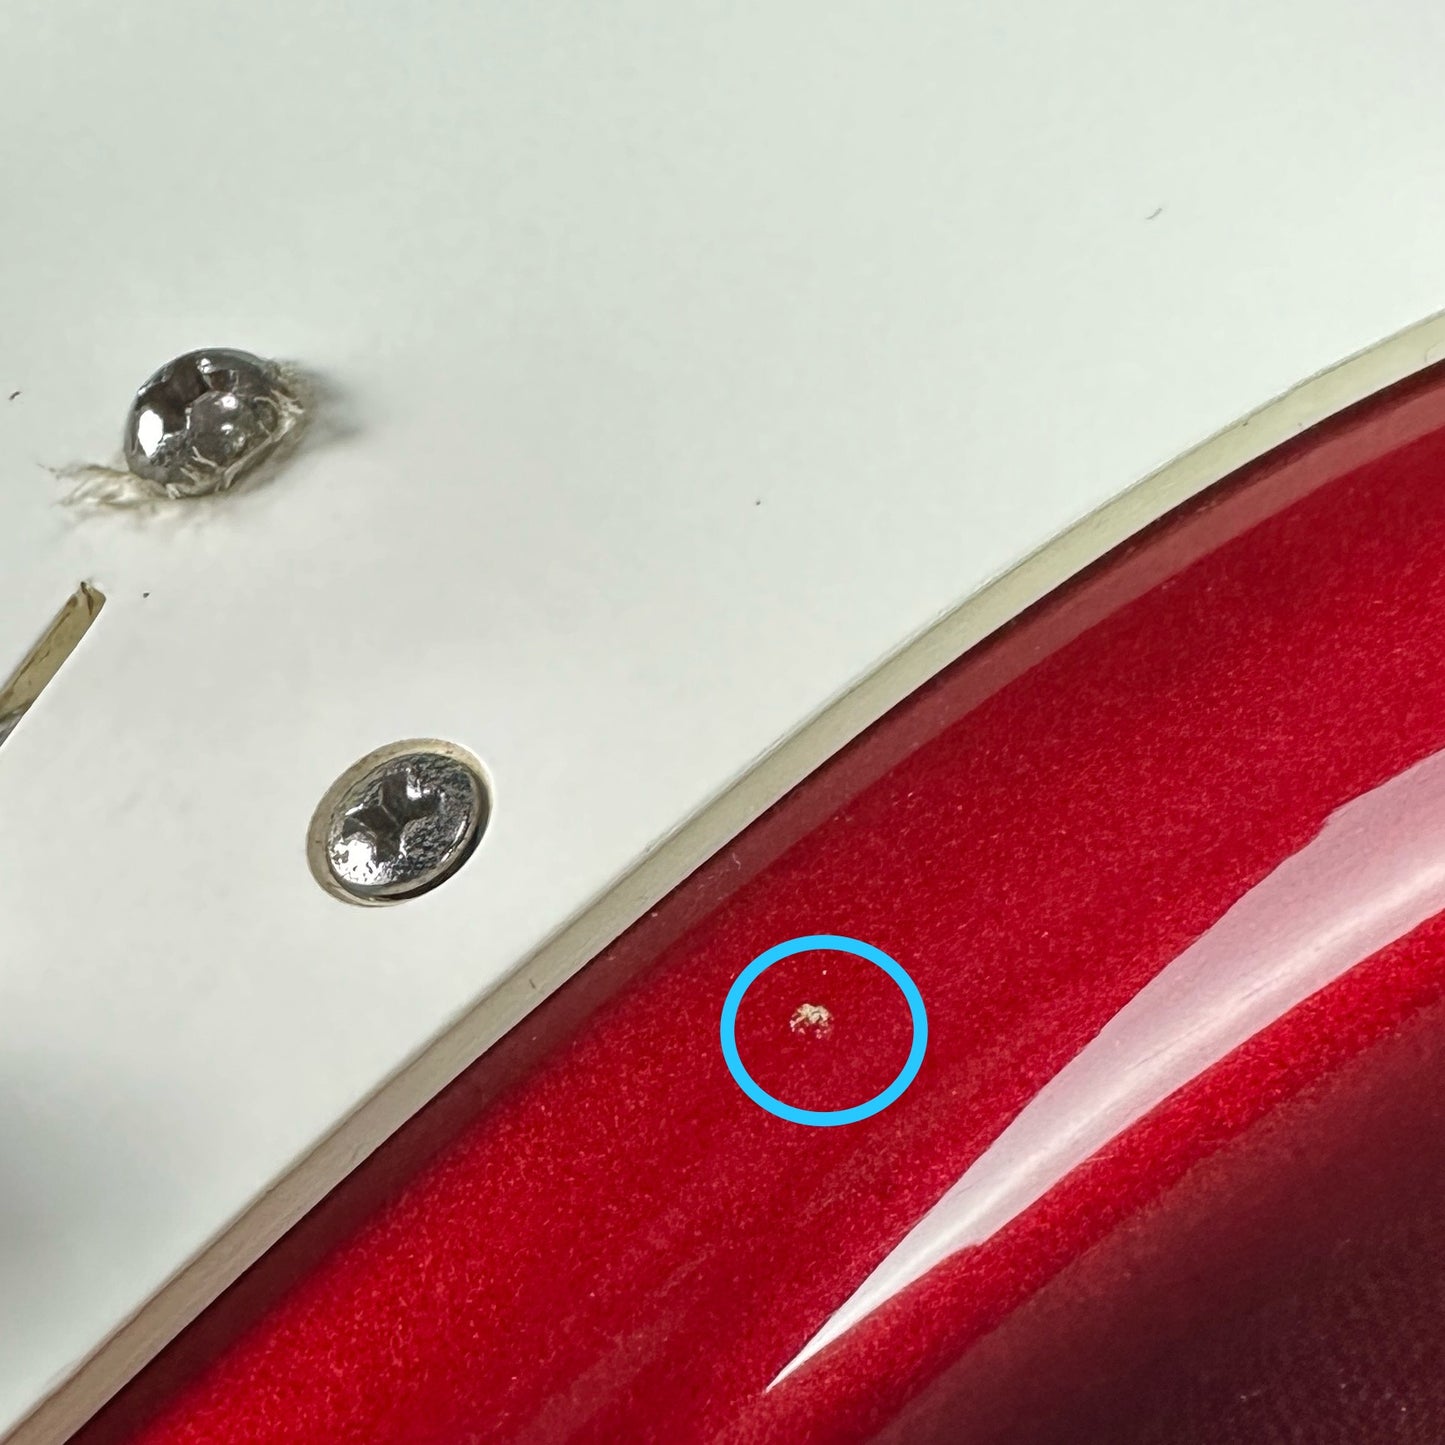 Small ding on body of Used 1983 Fender Dan Smith Era Candy Apple Strat.